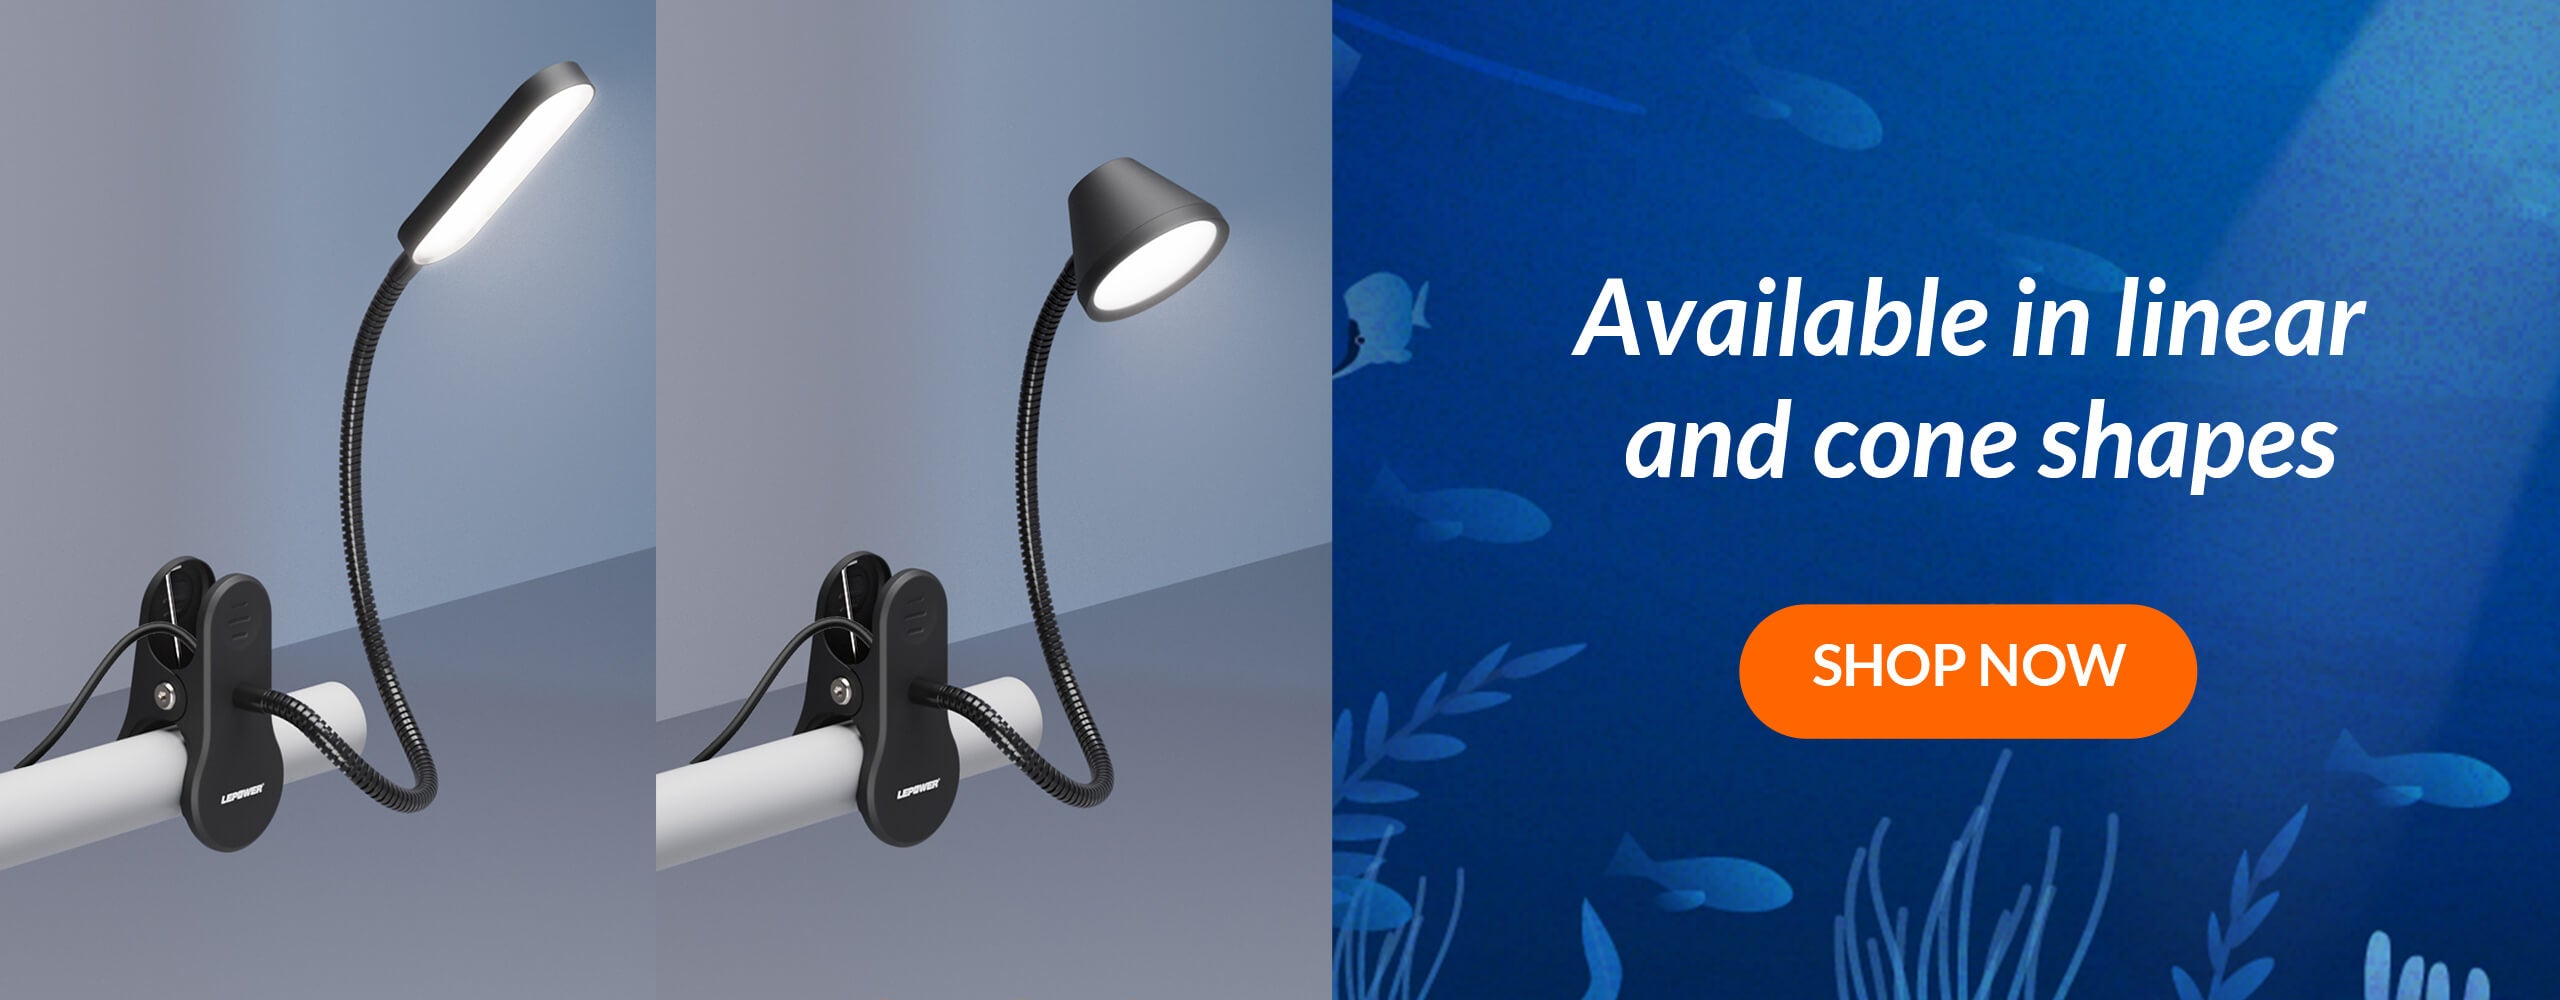 https://www.lepower-tec.com/products/sharkbite-led-clip-on-light-eye-caring-dimmable